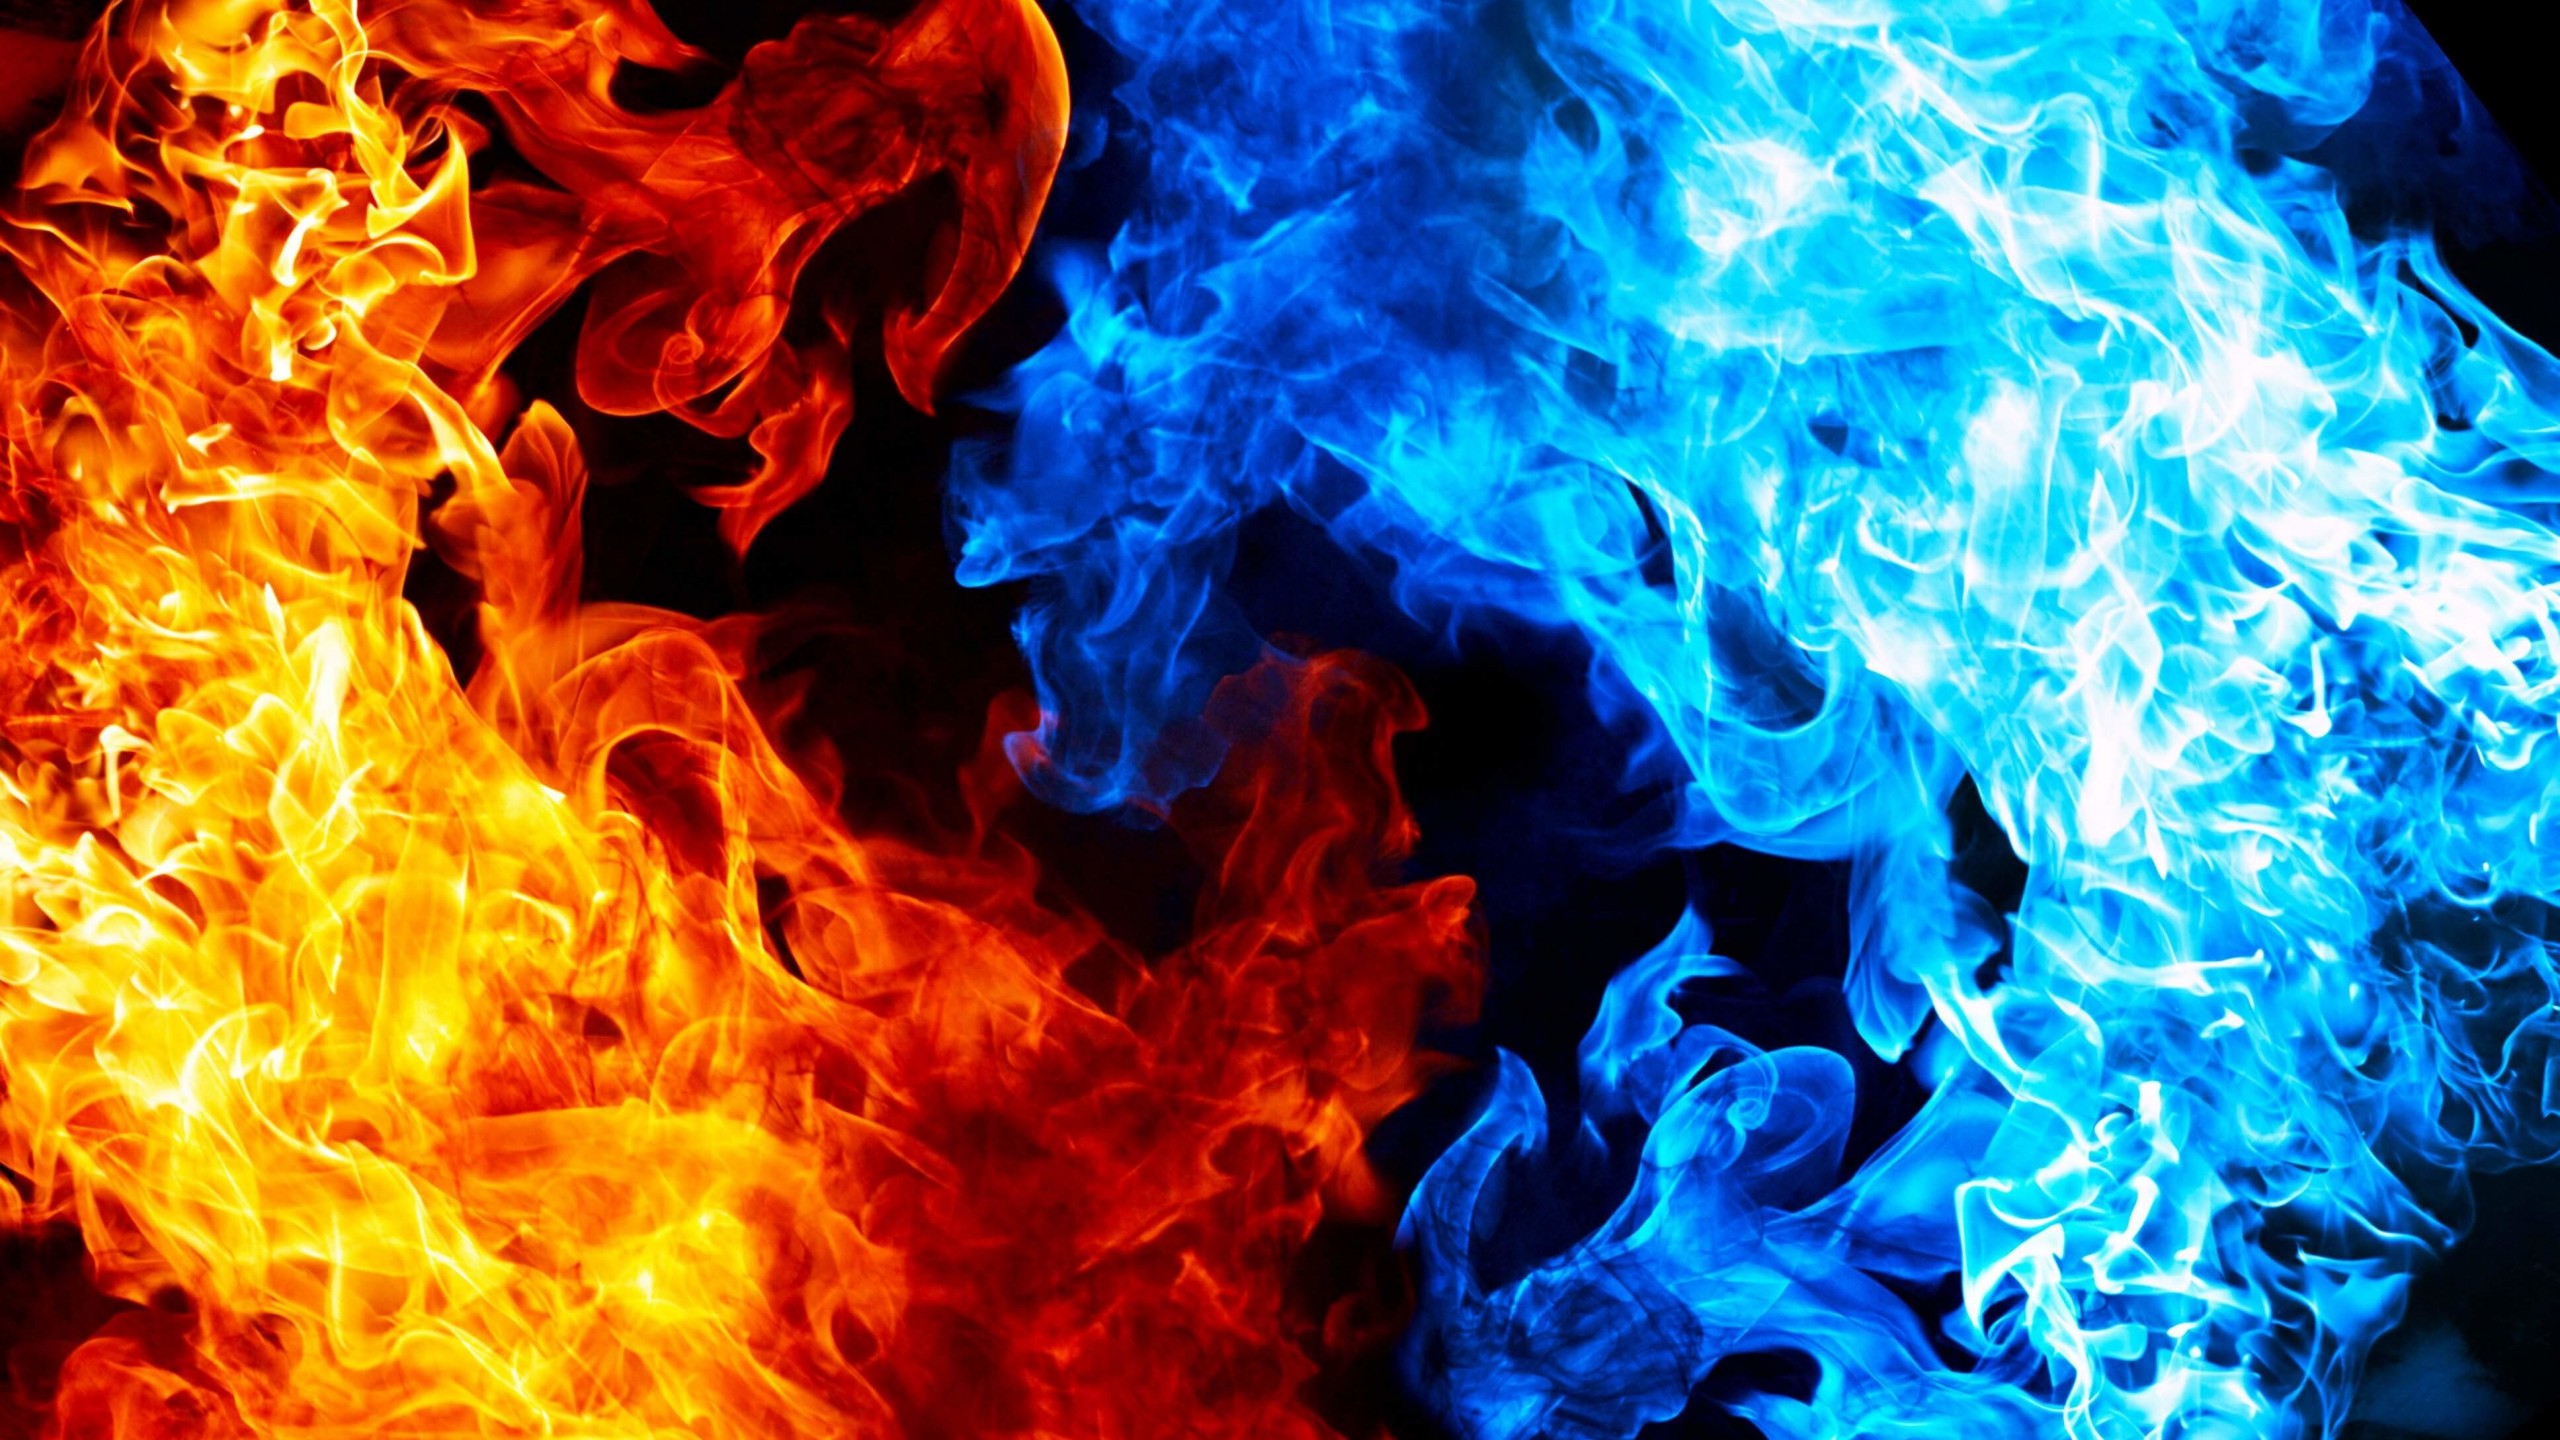 Blue And Red Fire Wallpaper for Social Media YouTube Channel Art